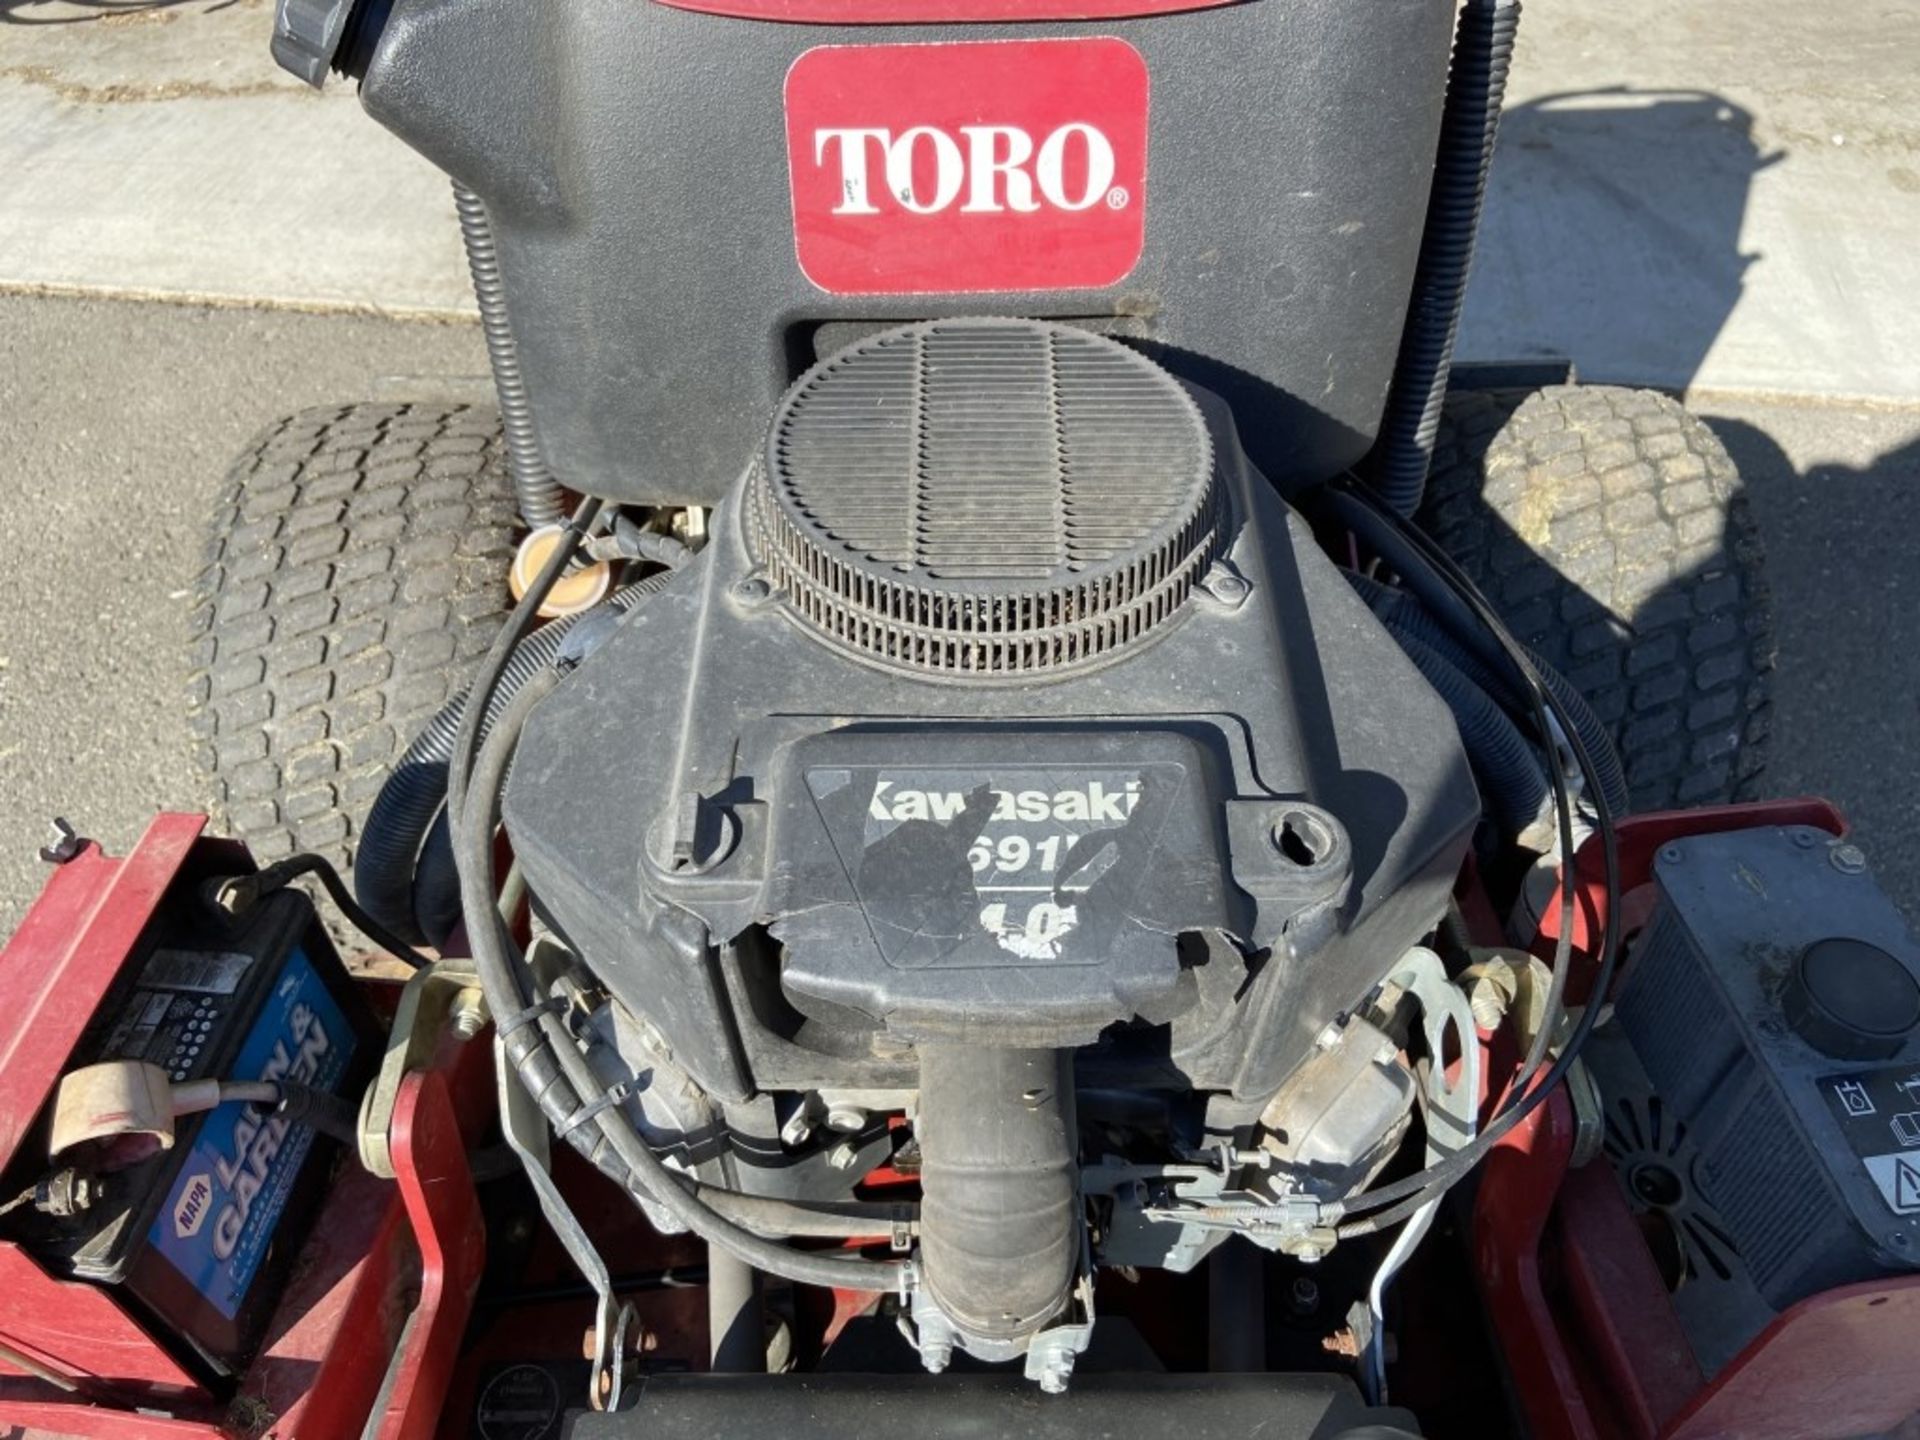 2013 Toro Grandstand Stand Up Riding Mower - Image 3 of 7